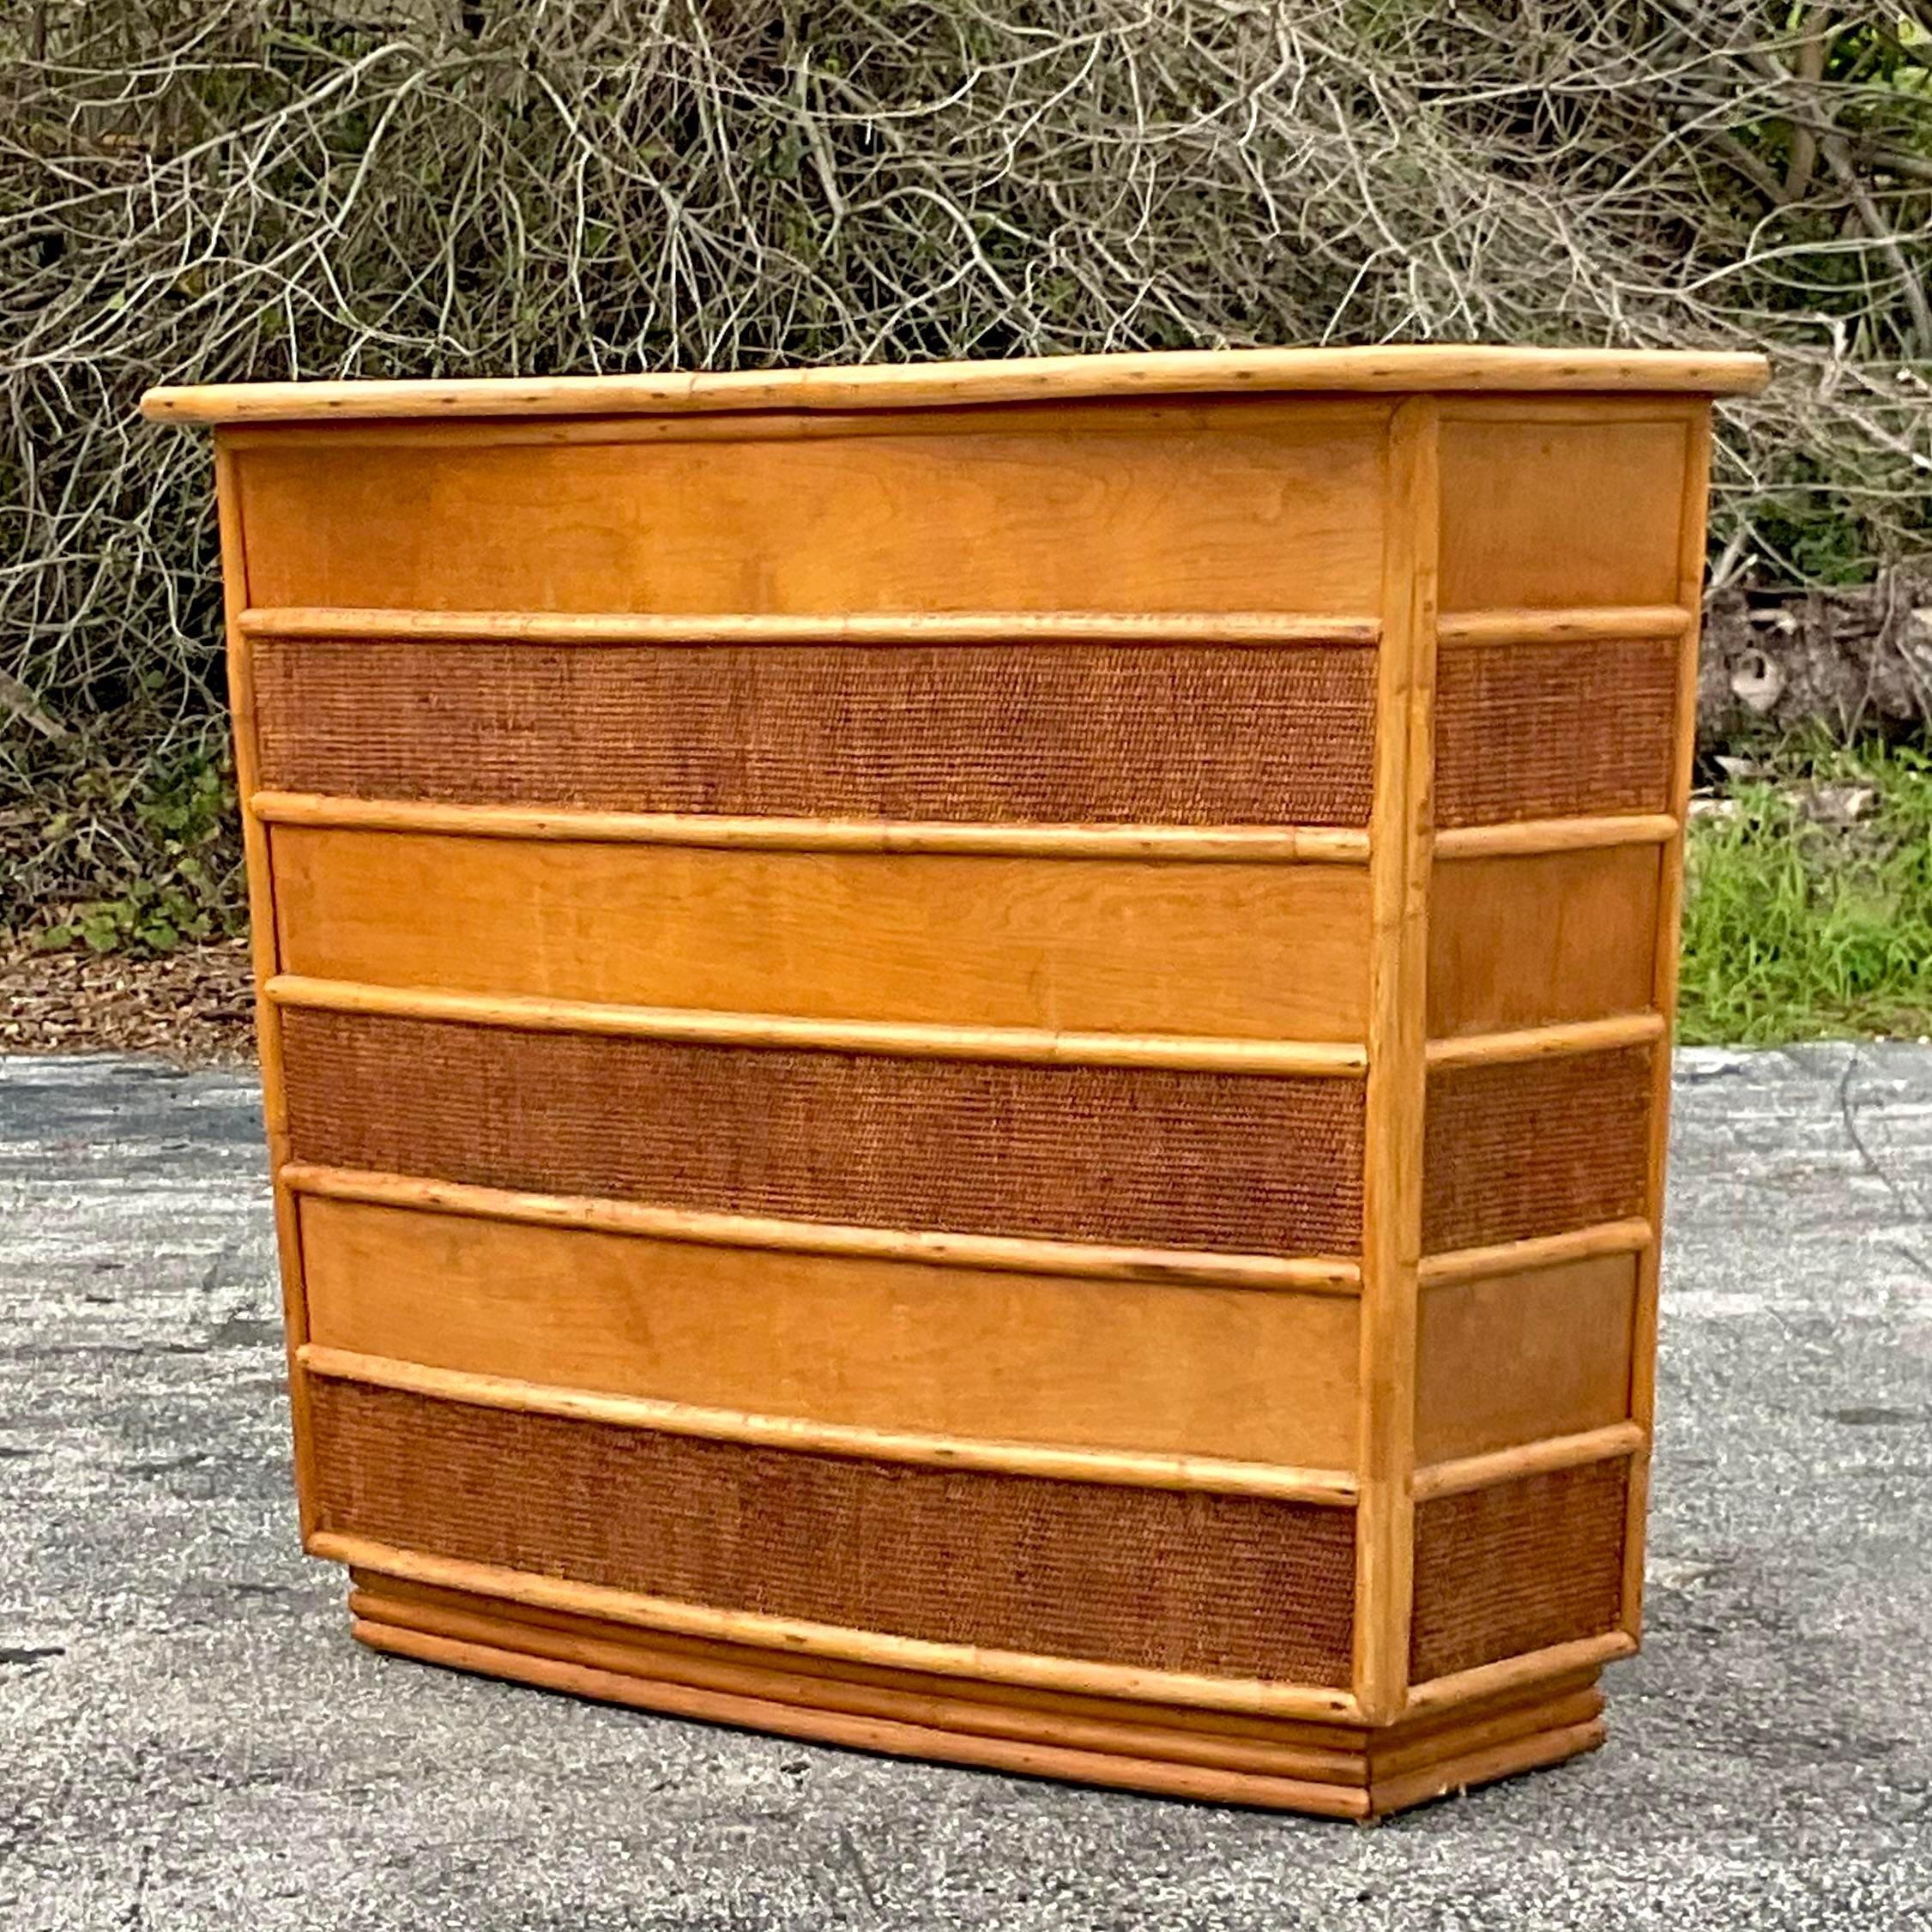 A fantastic vintage coastal dry bar. A gorgeous retro shape with bands of natural seagrass around the frame. Period kidney shaped laminate top. Lots of great storage behind. Acquired from a Palm Beach estate.